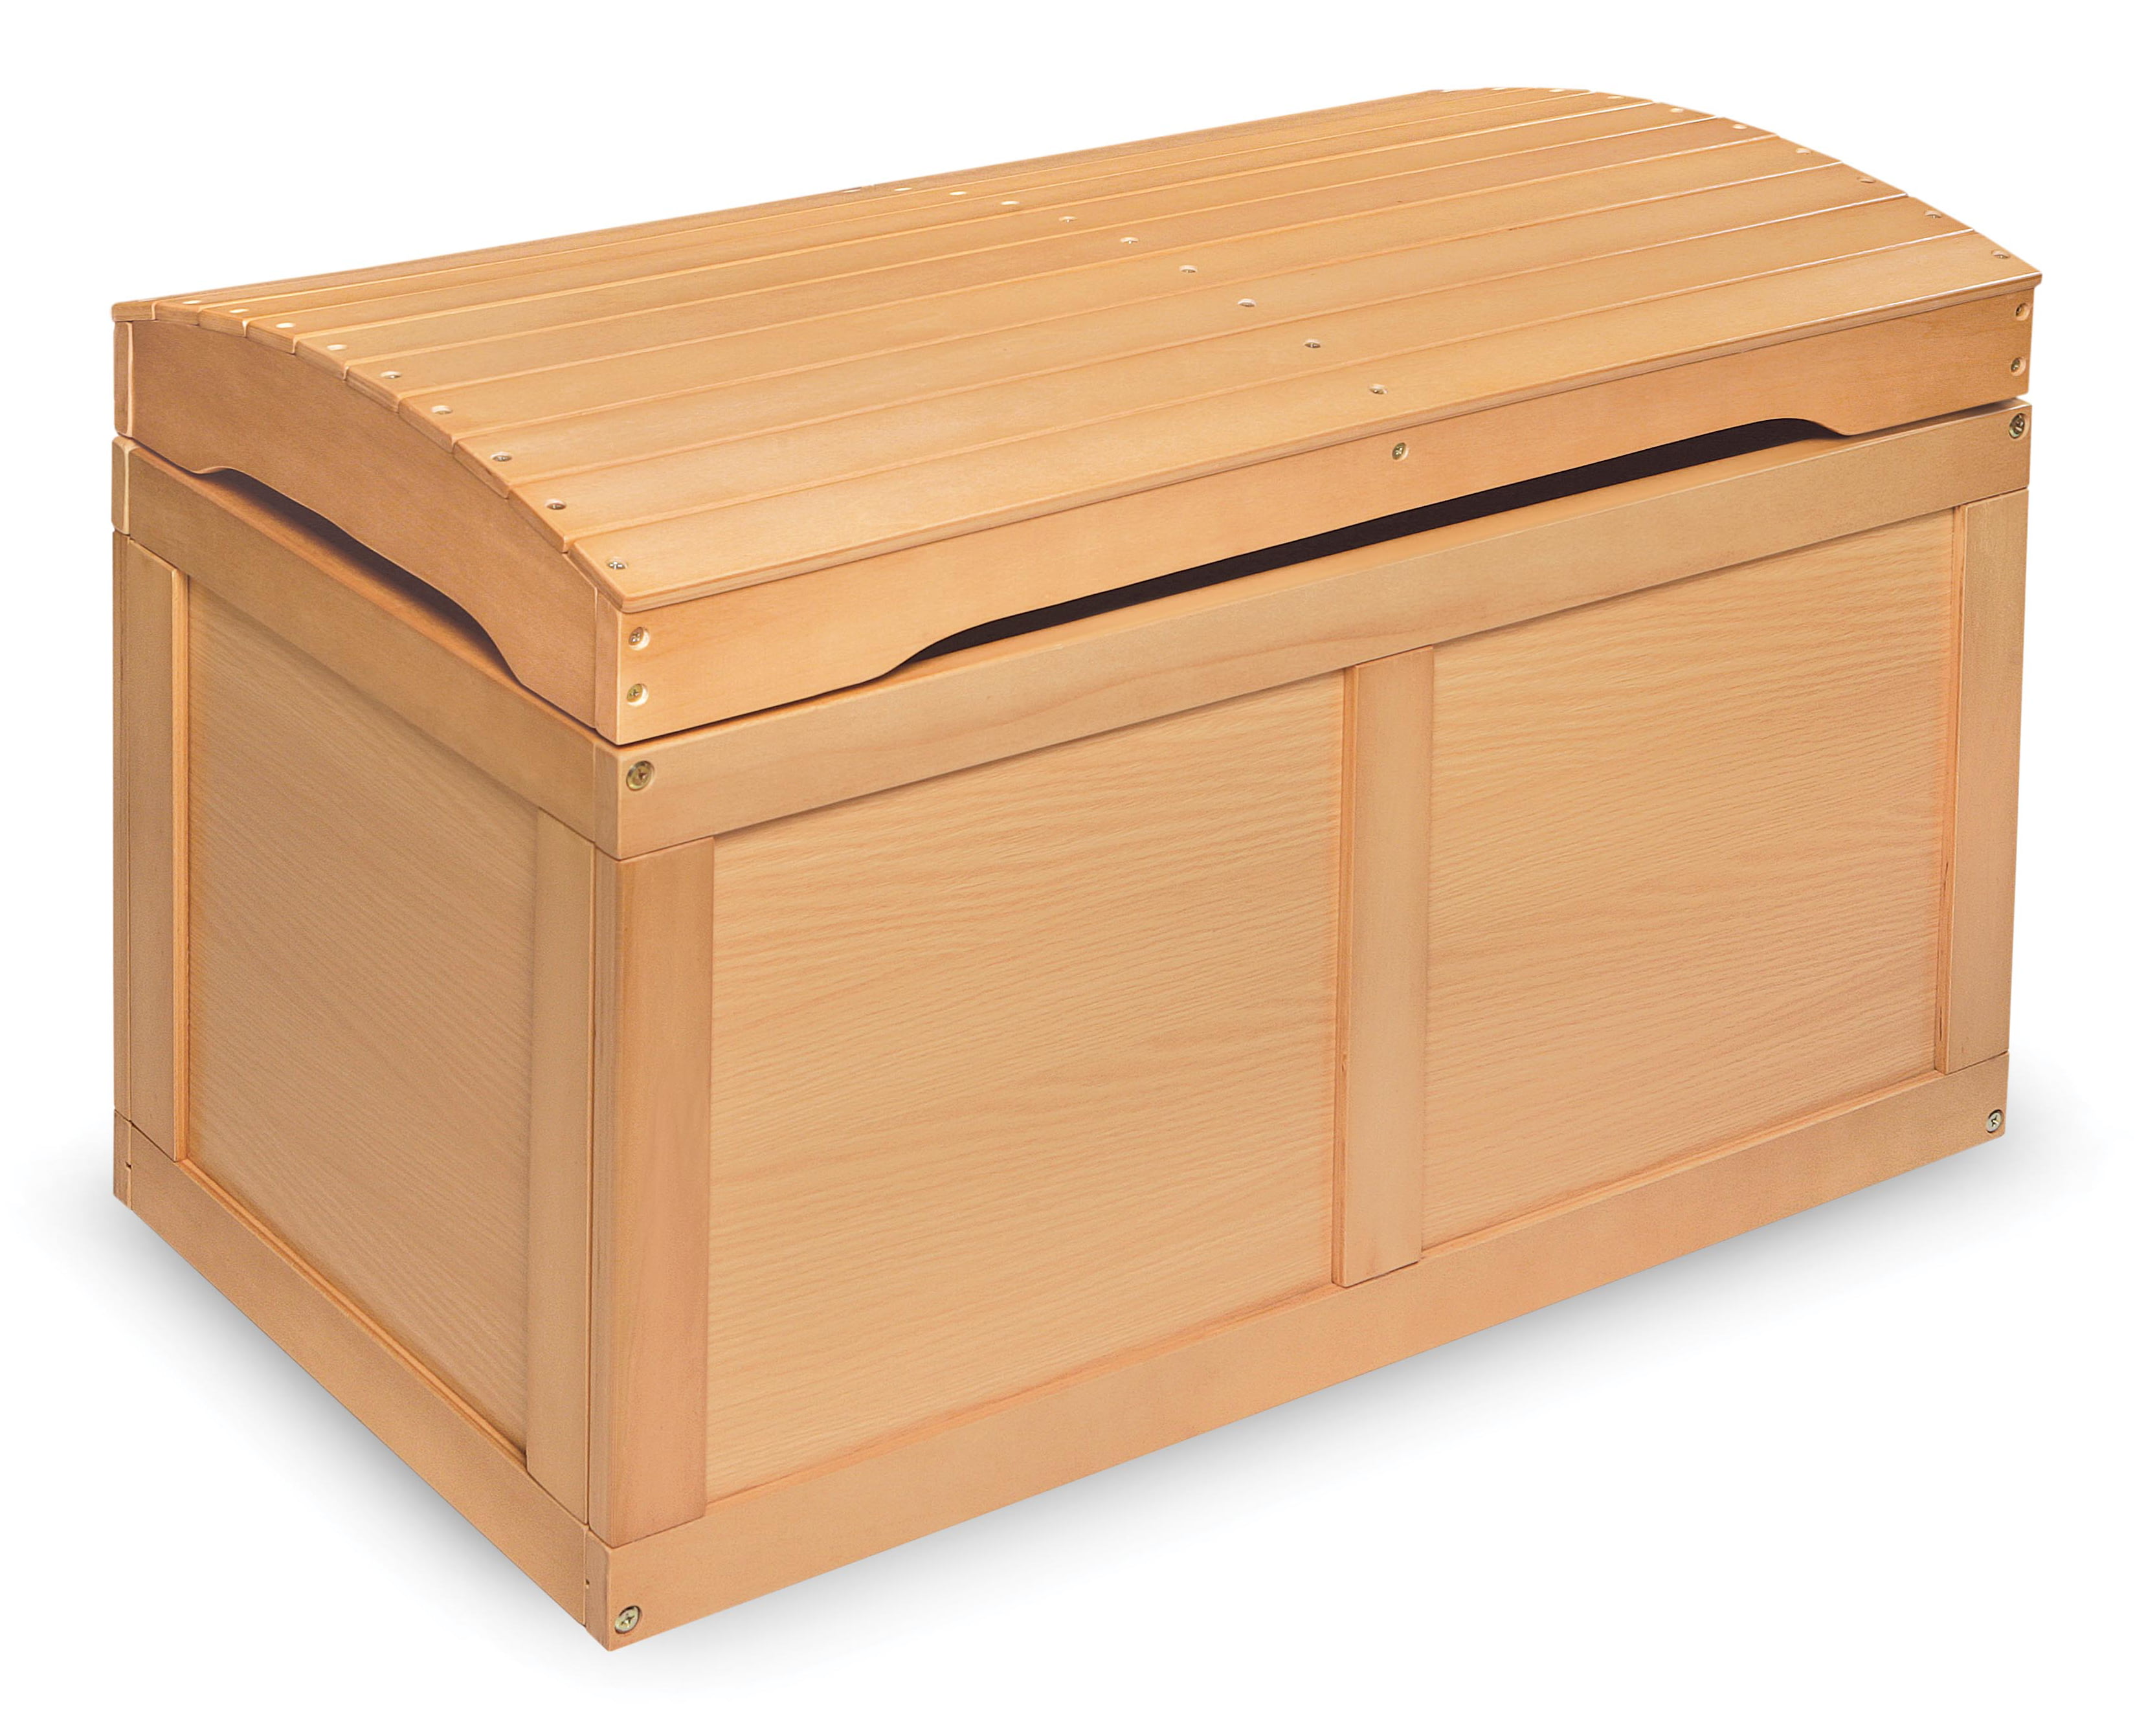 cheapest wooden toy box